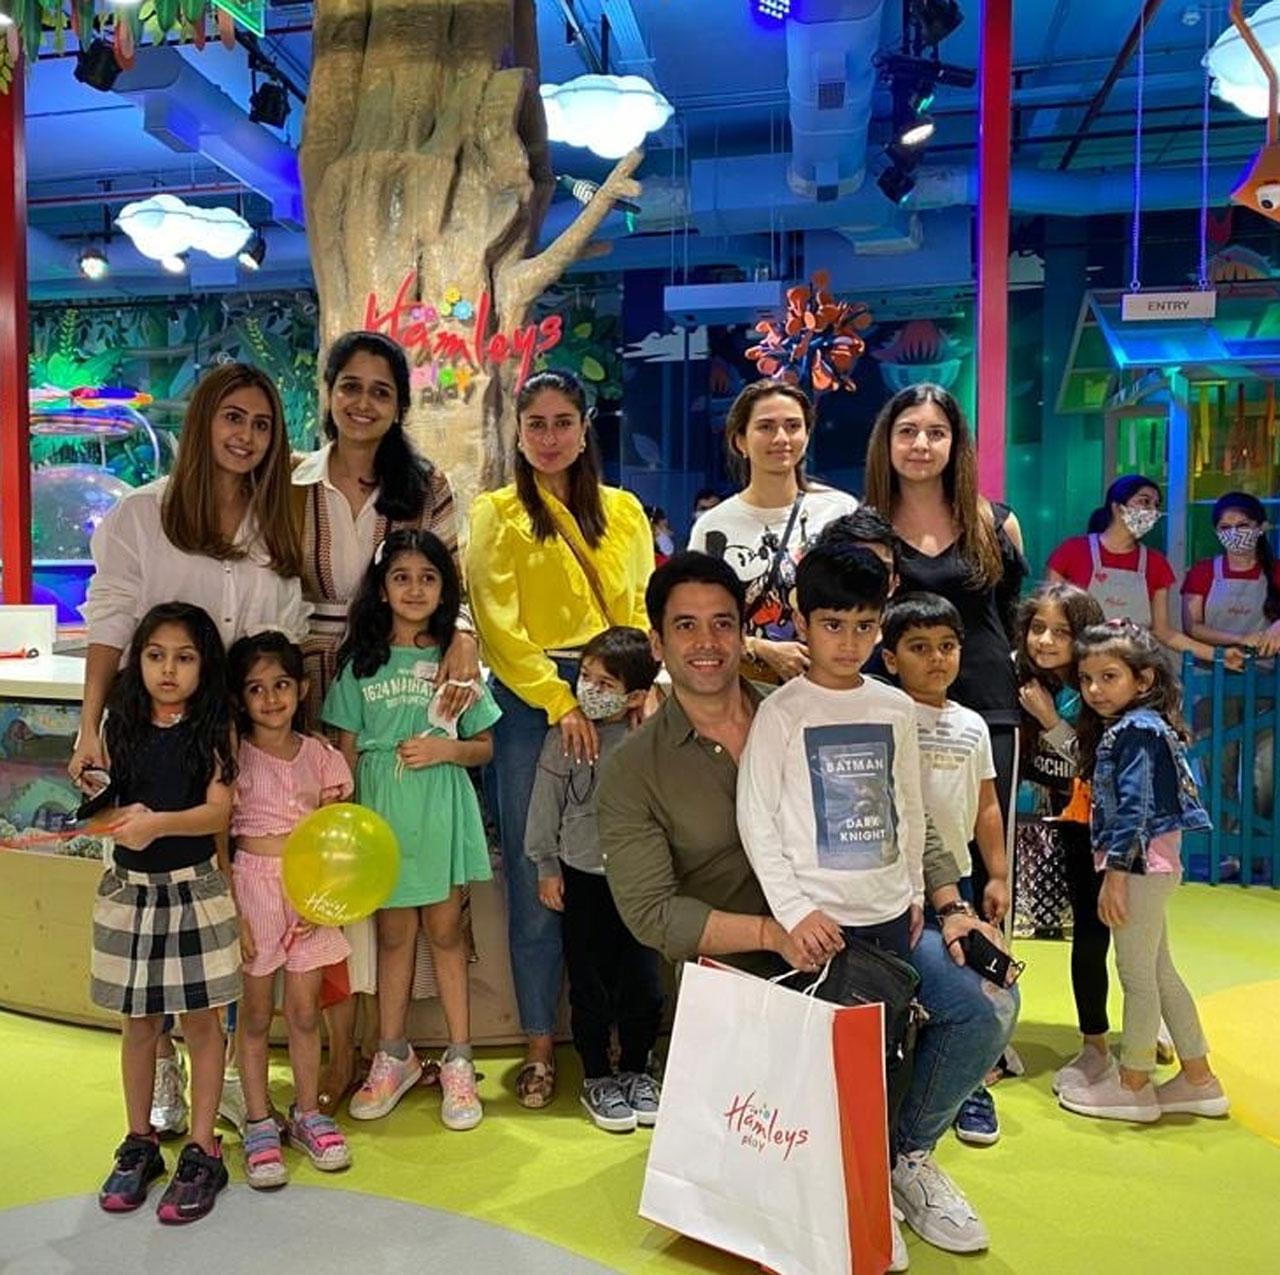 Kareena and her kids had the company of Tusshar Kapoor and his son Laksshya Kapoor. The actress shared a post on her Instagram account and the picture had a lot of kids that were friends with the actors’ kids.